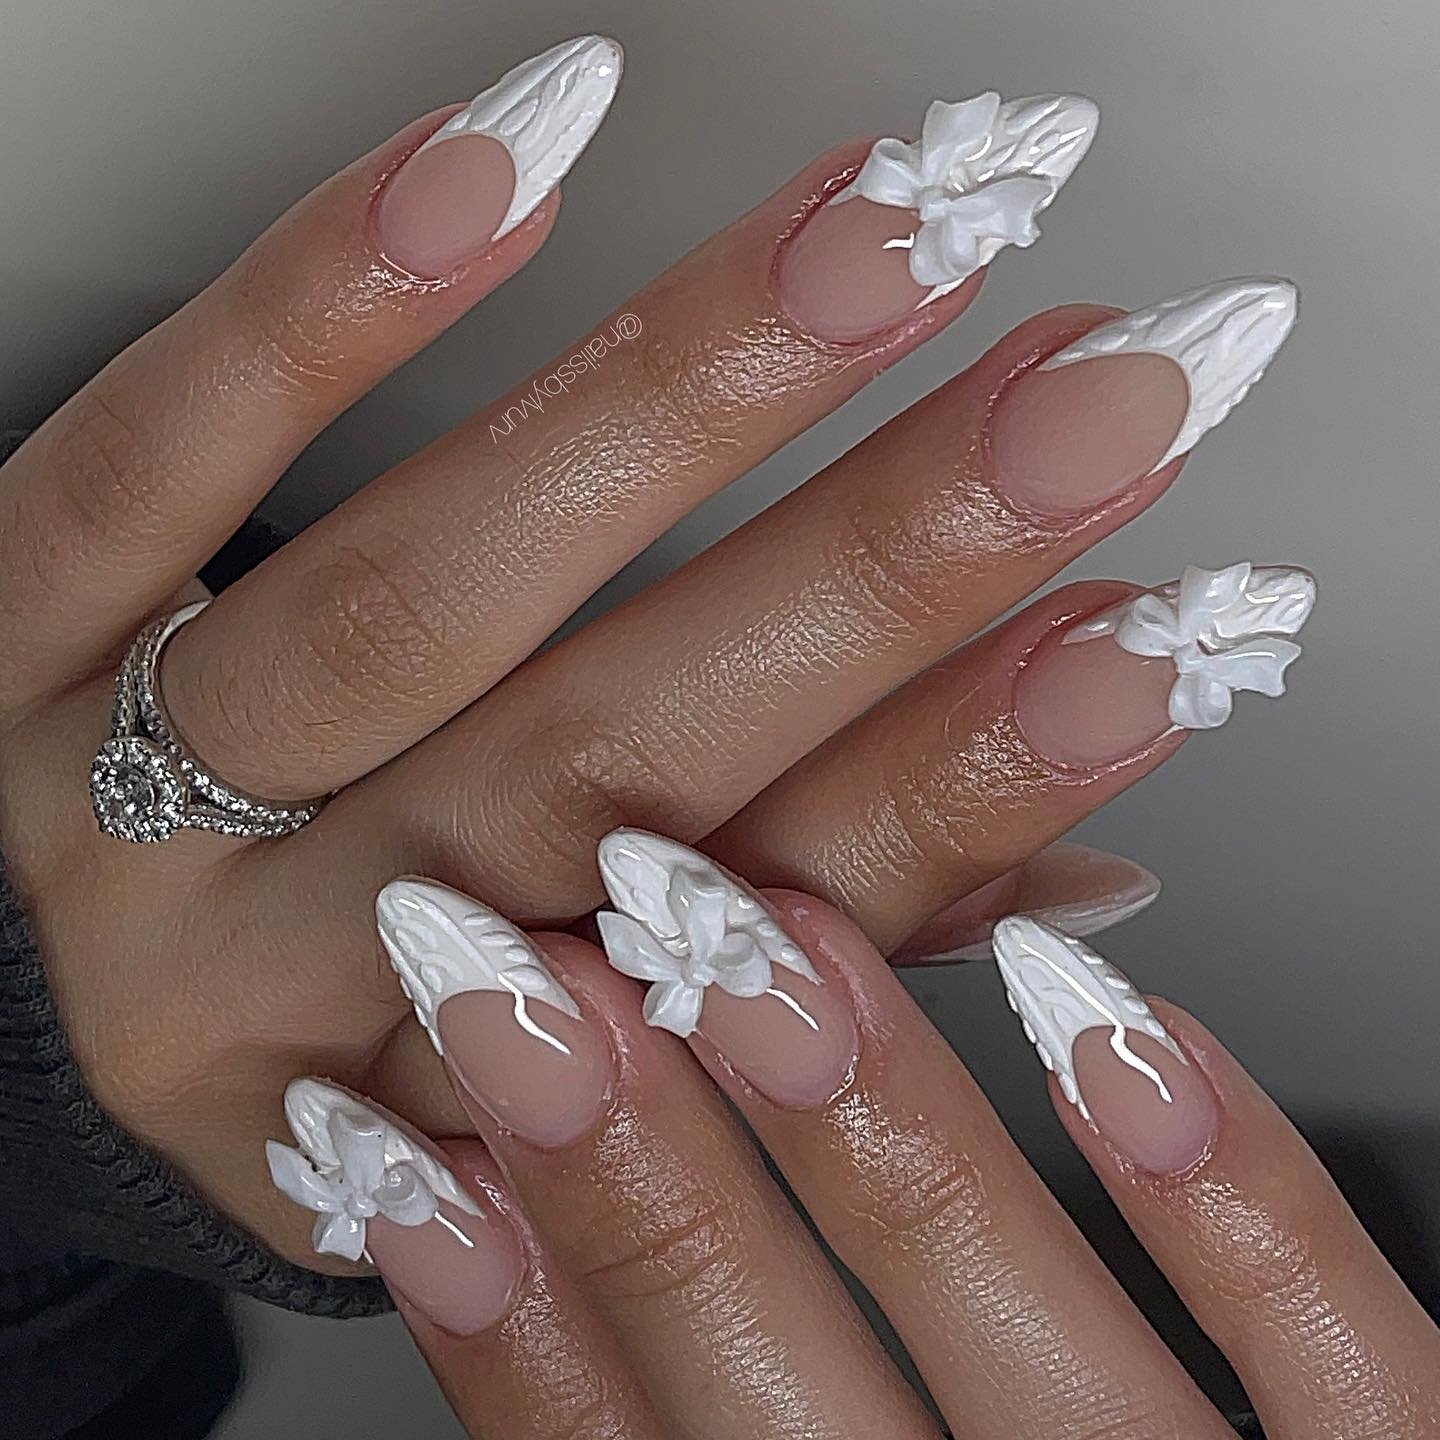 25 - Picture of Acrylic Nails